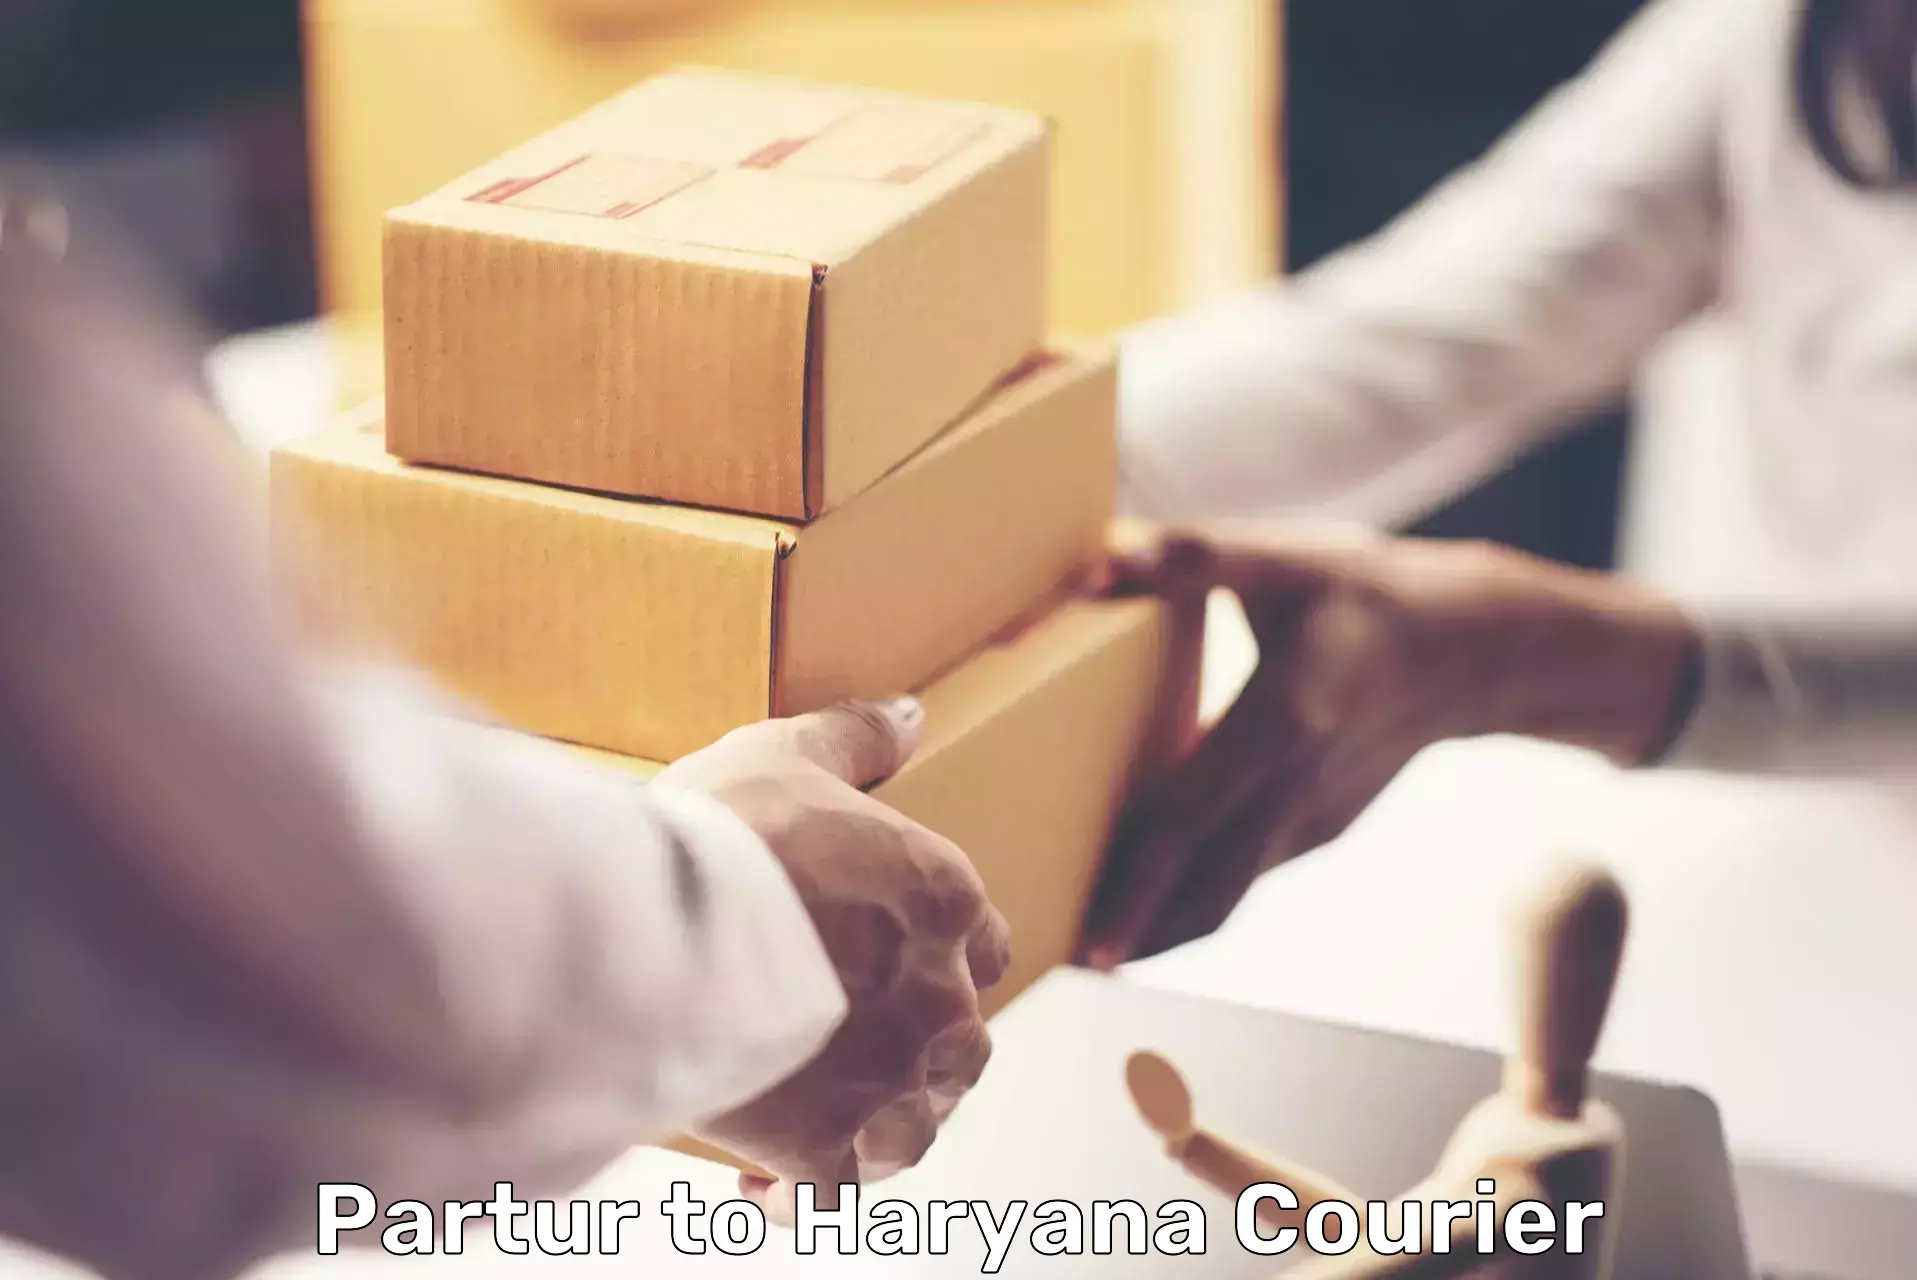 Customer-centric shipping in Partur to Jhajjar